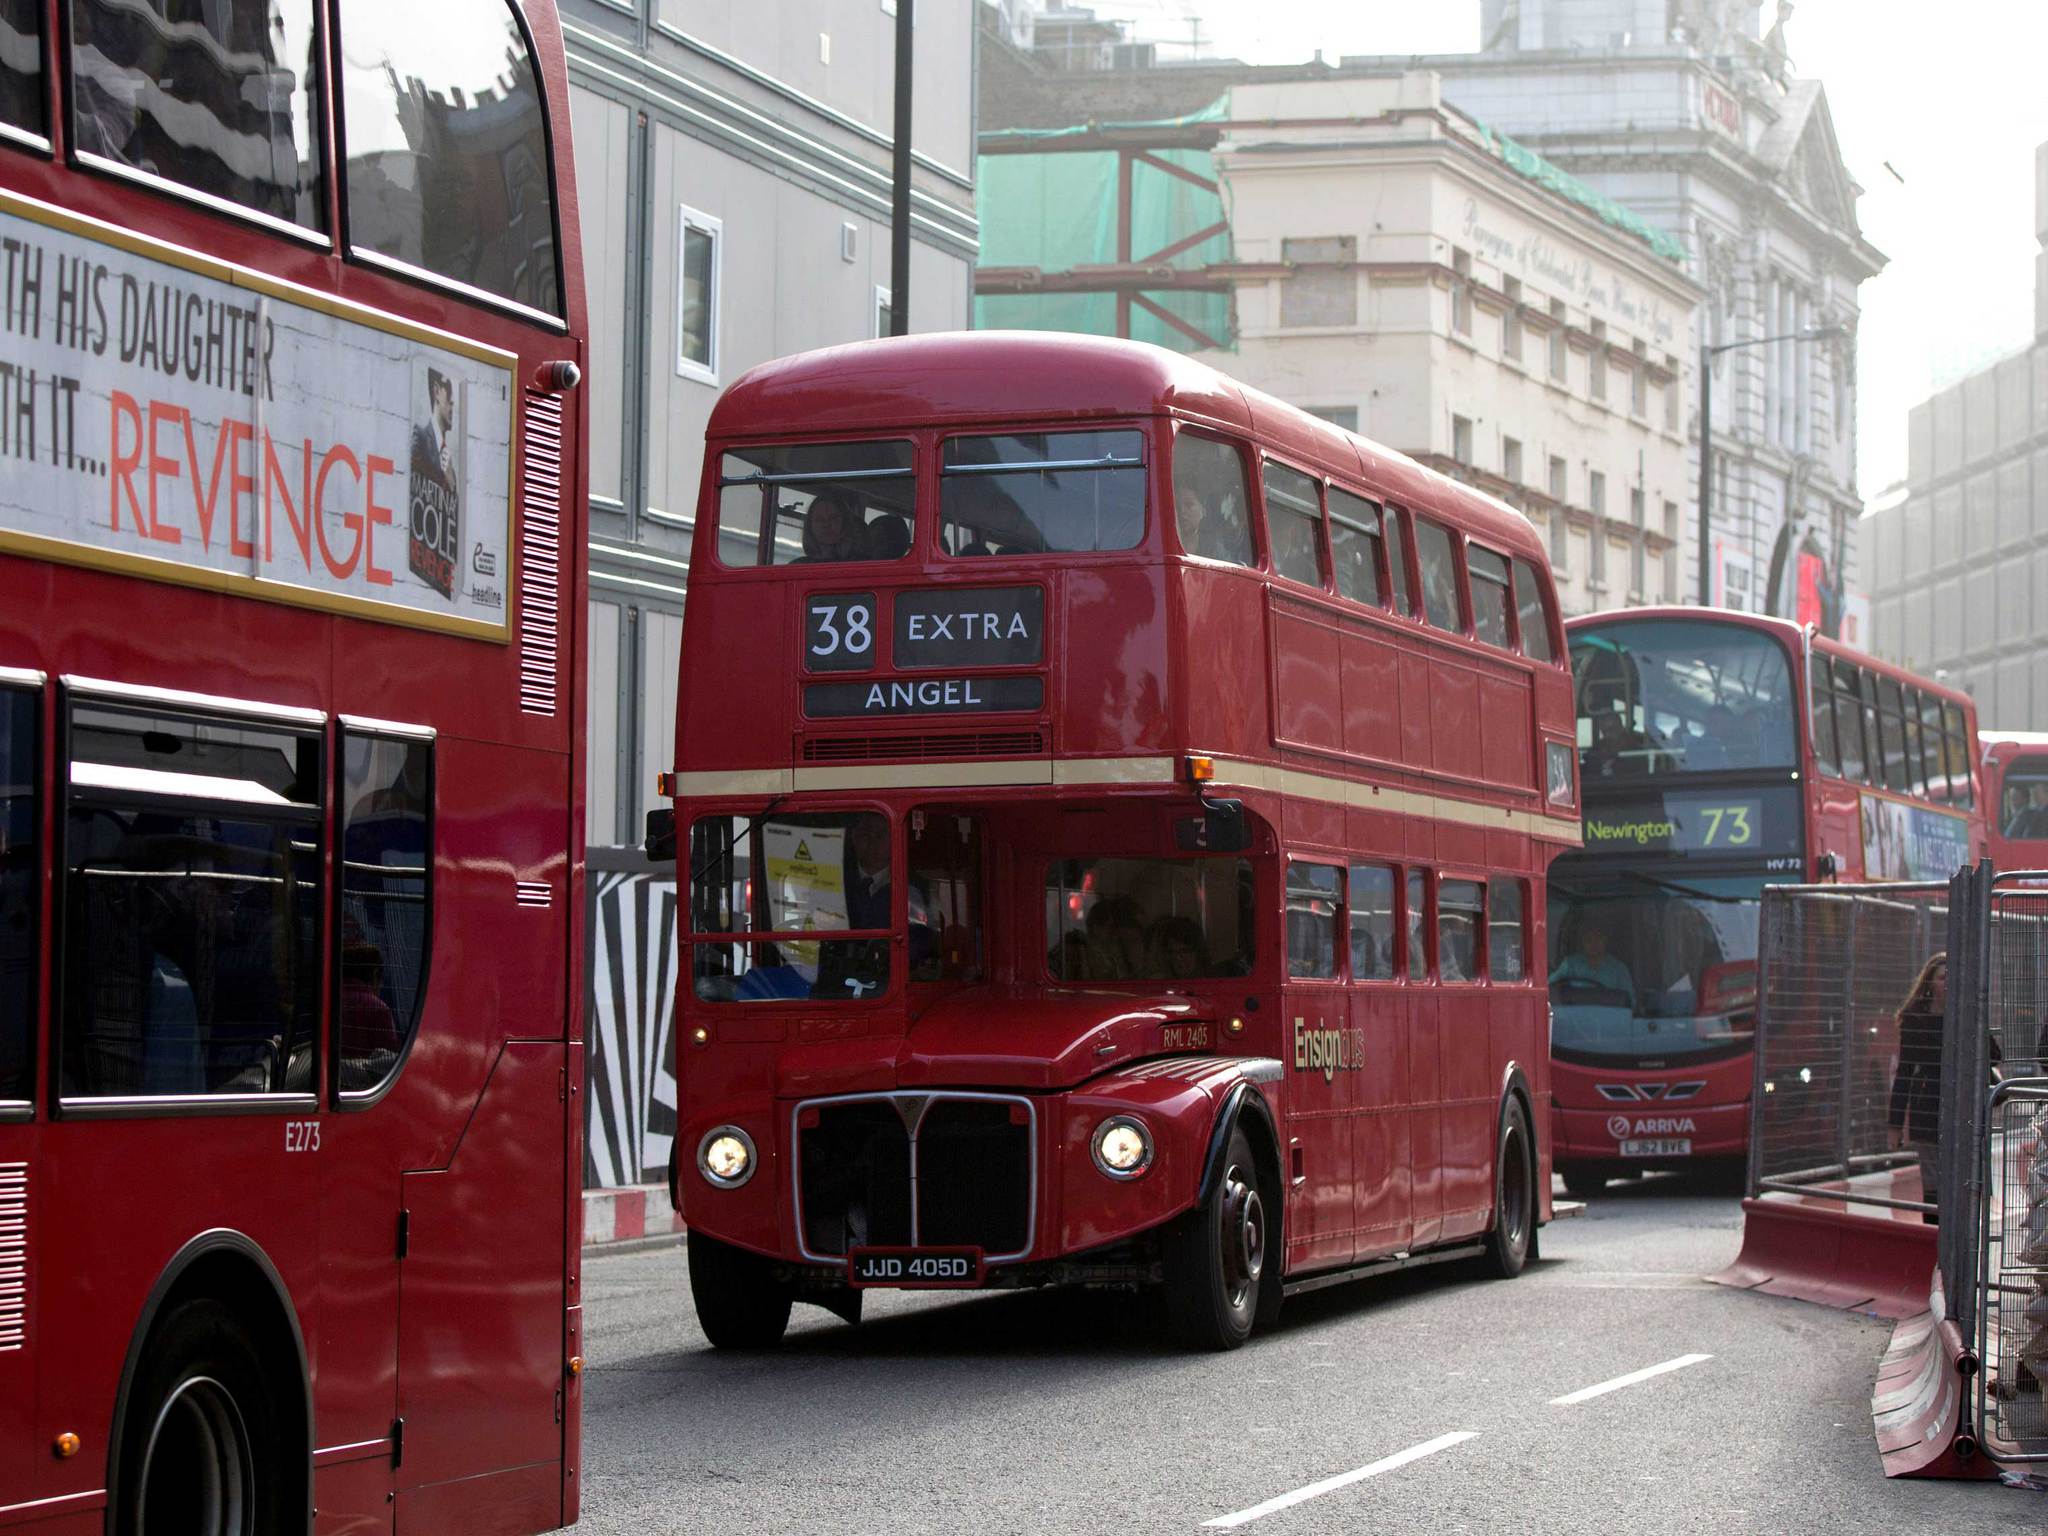 Routemaster buses near Victoria station